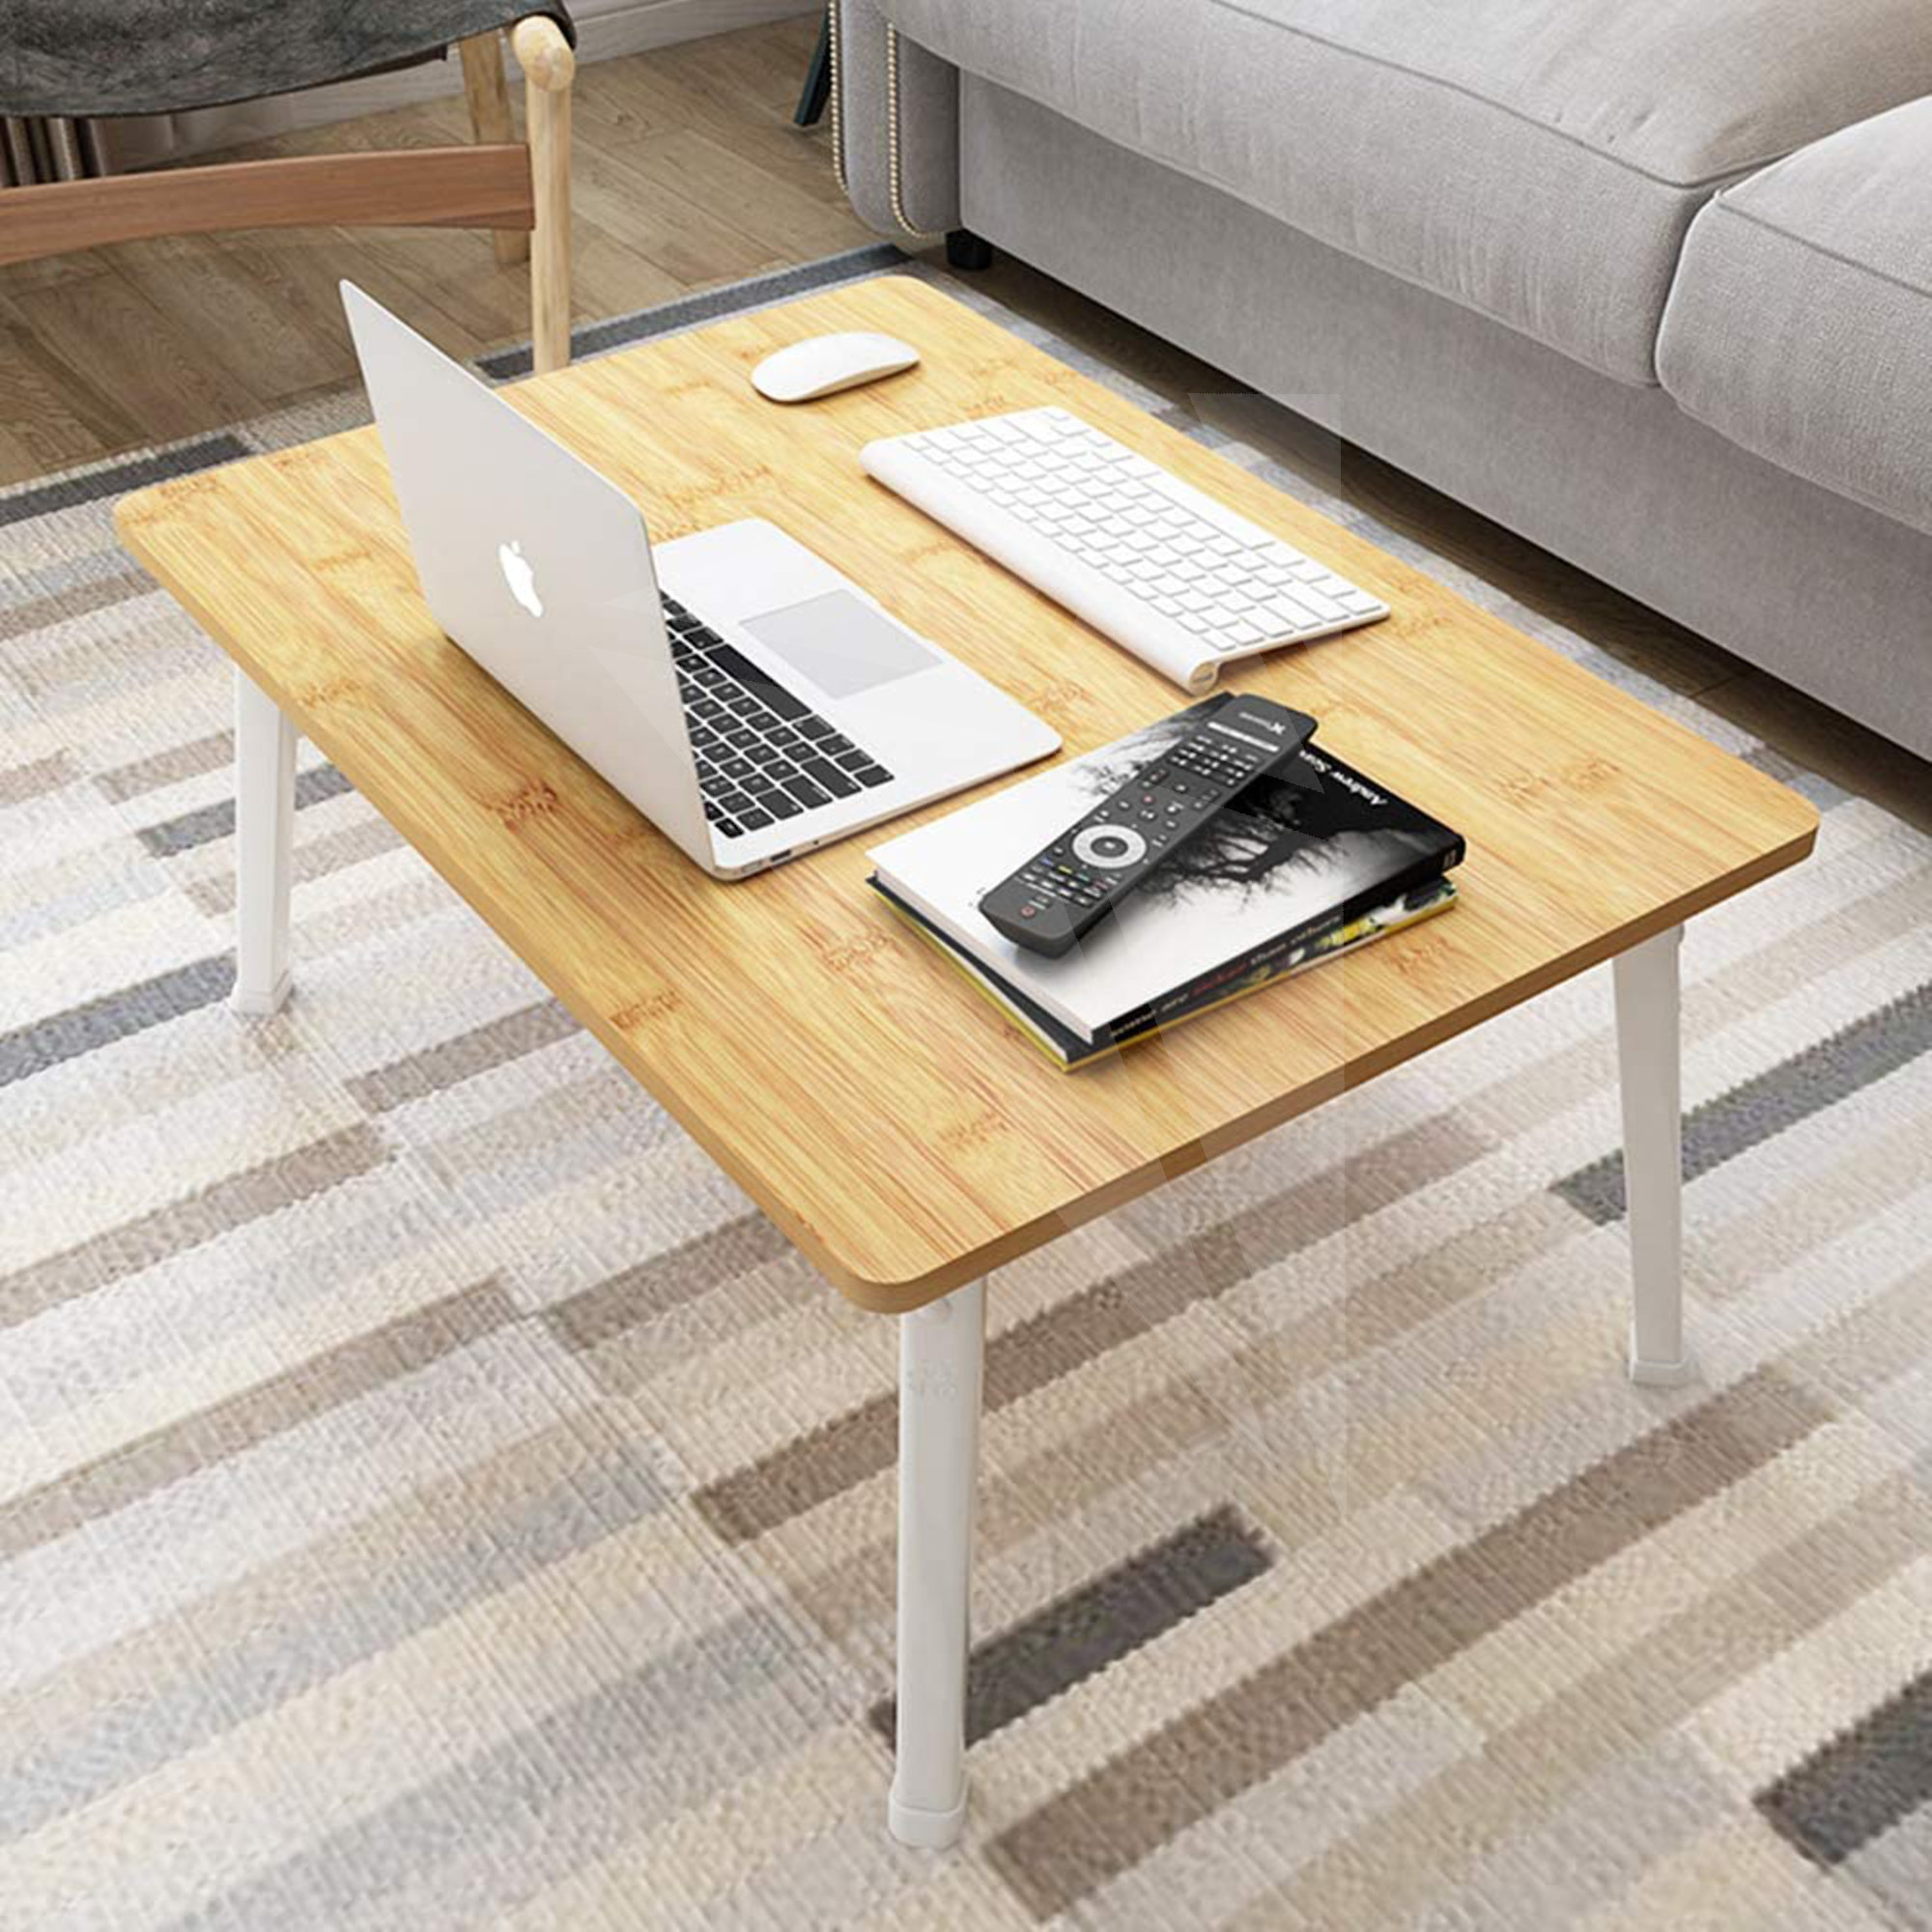 Lap Table For Studying Bamboo Folding Laptop Stand M&W Wooden Bed Desk Folding Legs Breakfast Tray Laptop Tray Bed Bed Table